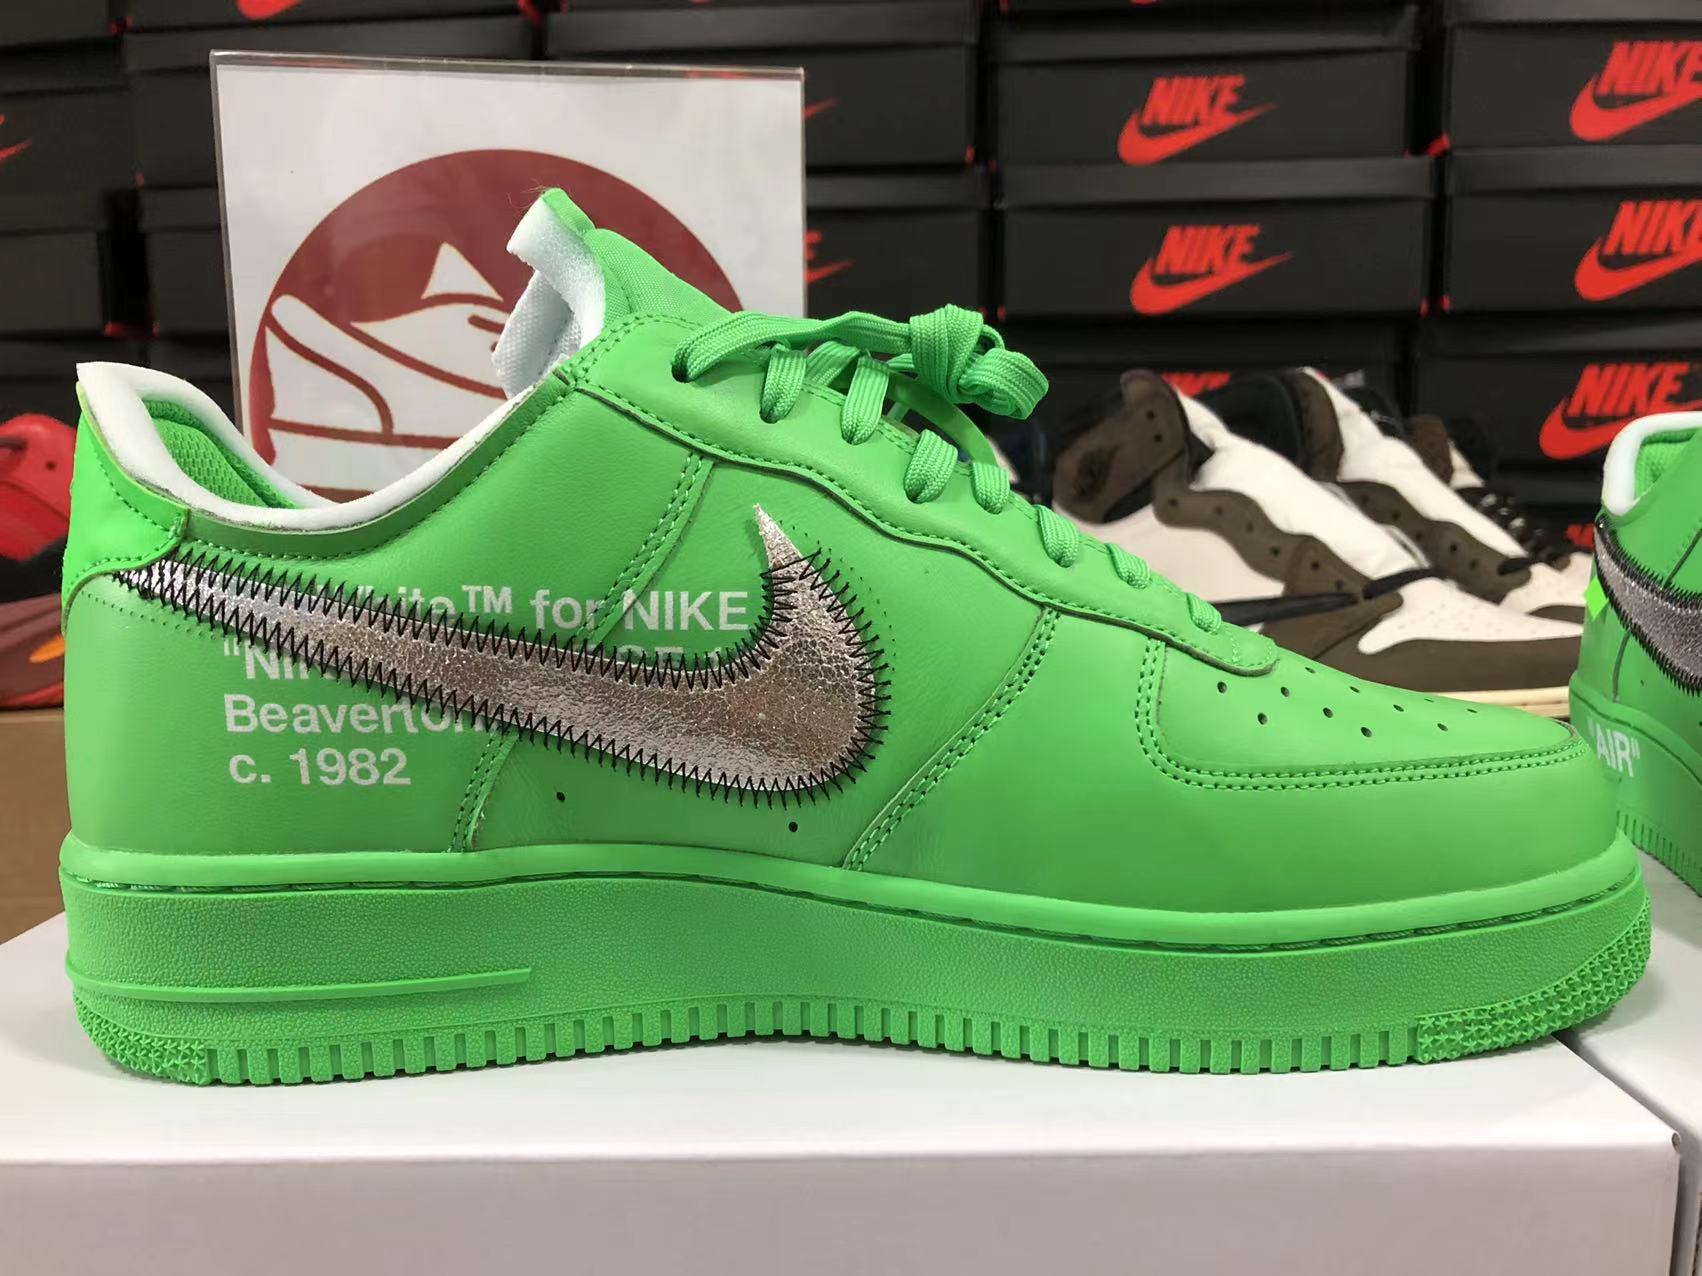 Nike x Off-White Air Force 1 Low Green Spark "Brooklyn"  (DX1419-300) - Size 5M